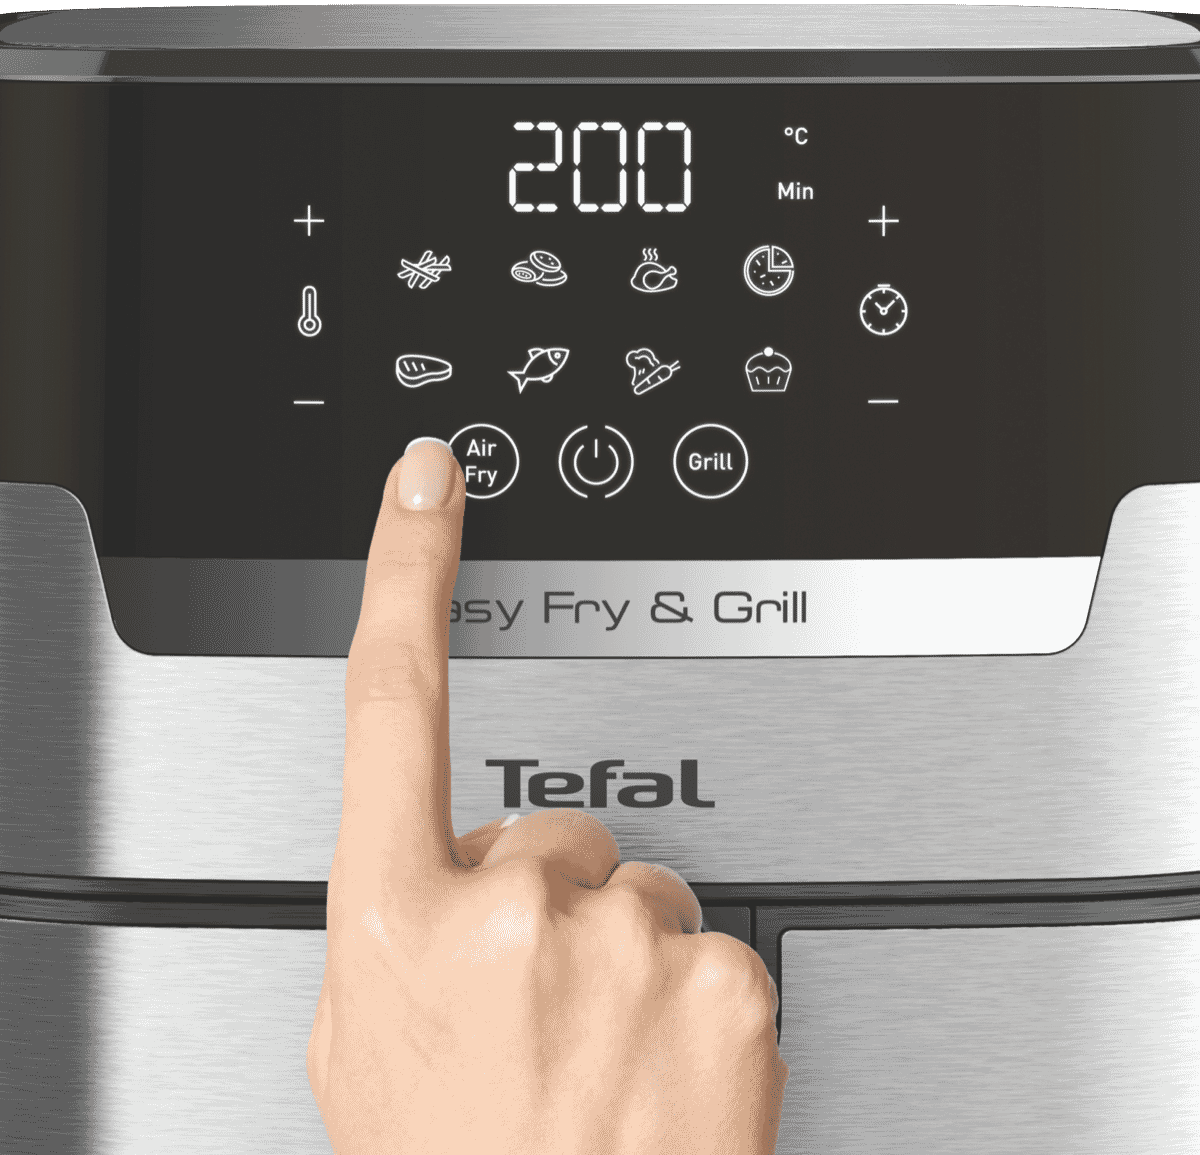 Tefal EY505D Easy Fry & Grill Deluxe Air Fryer at The Good Guys